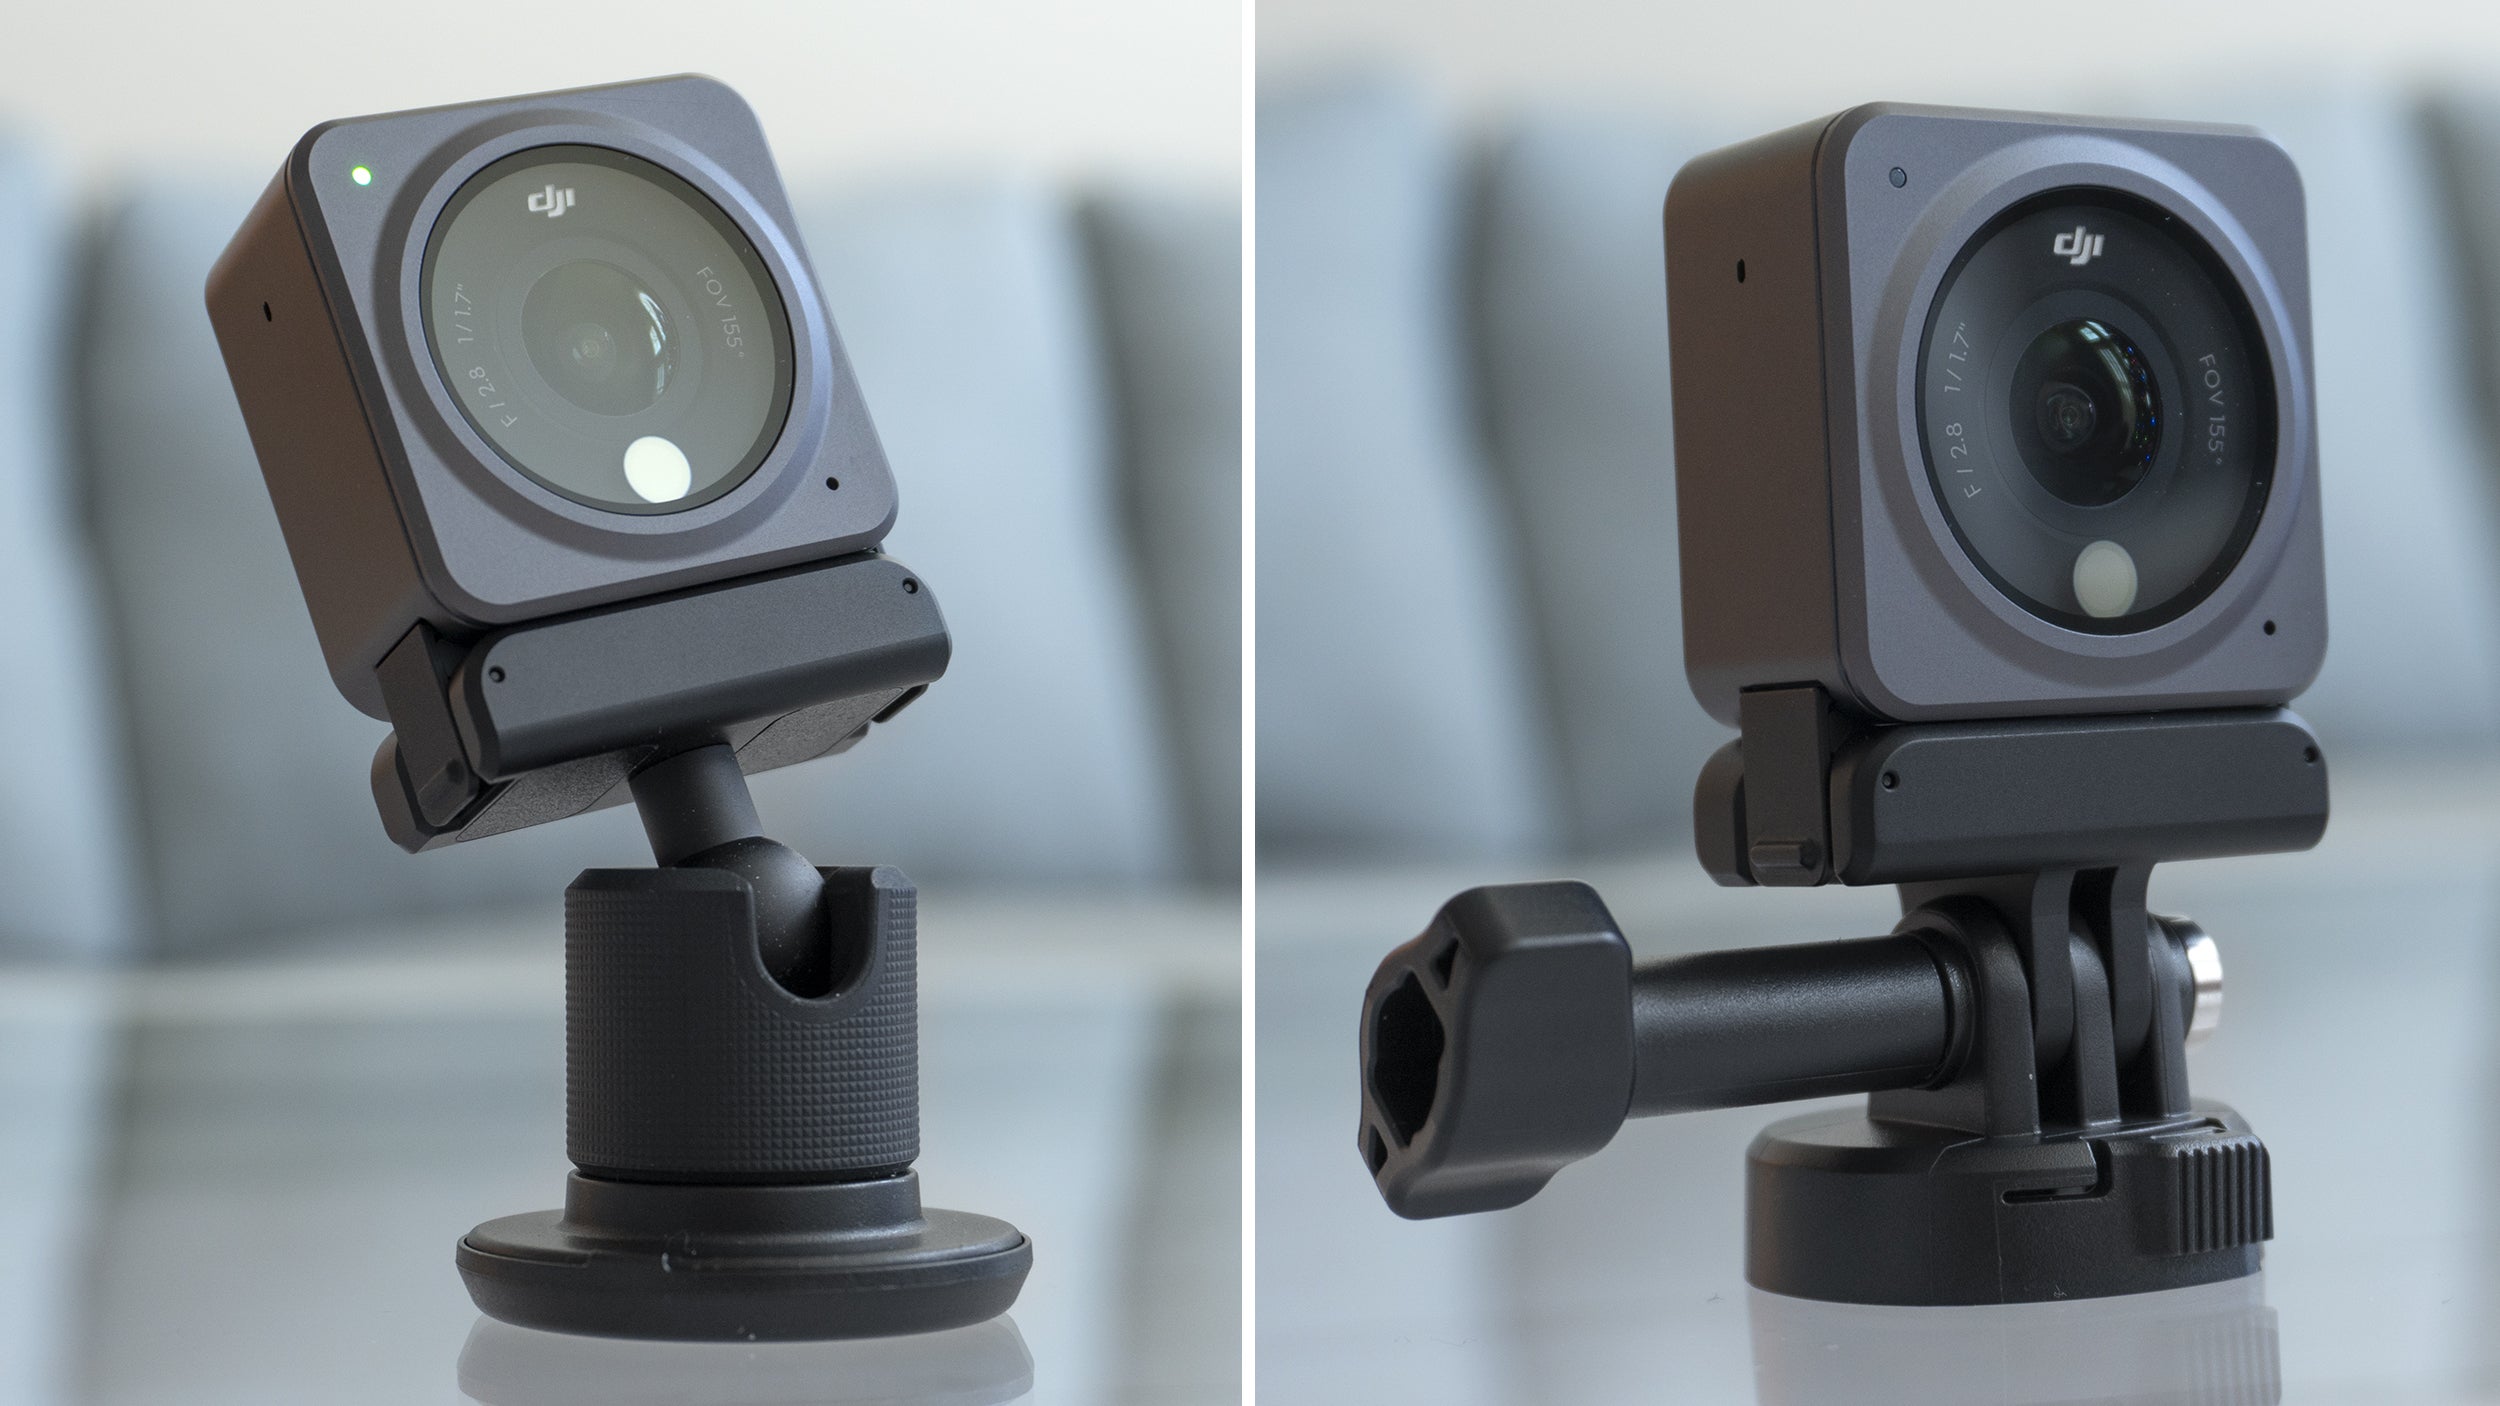 Simpler accessories magnetically attach to the Action 2 as well, including tripod and GoPro mounts. (Photo: Andrew Liszewski - Gizmodo)